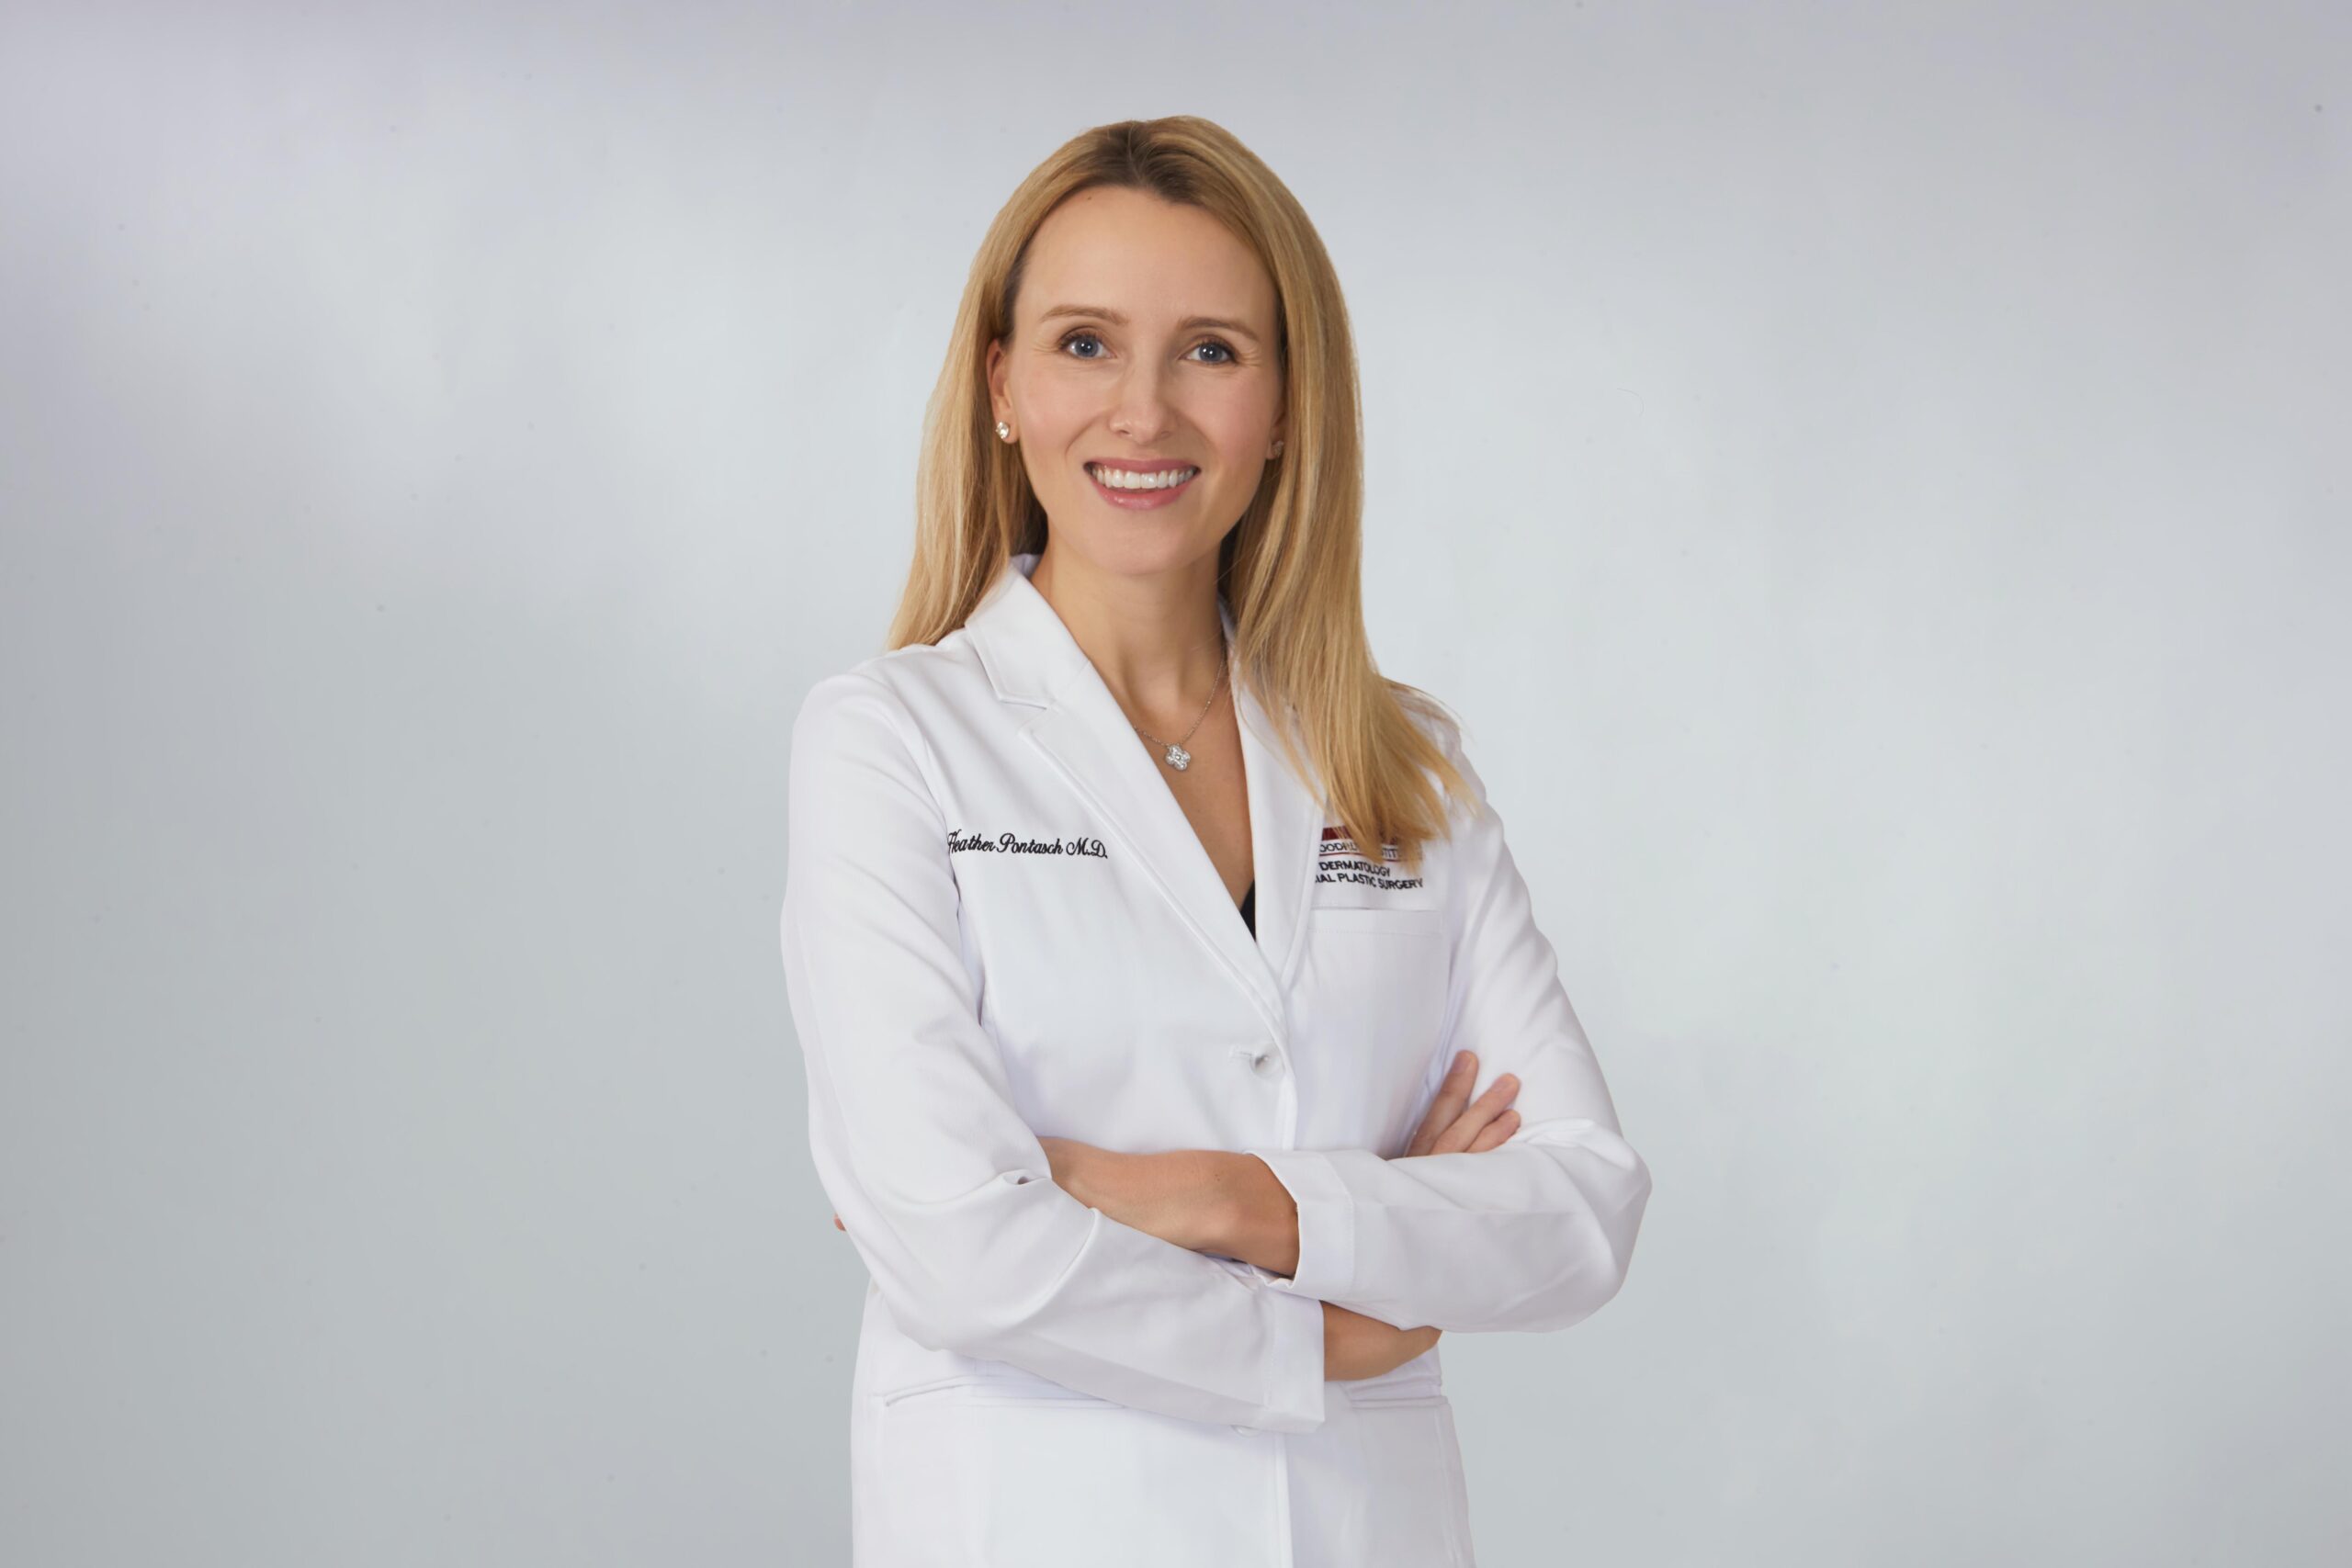 Welcome our new Dermatologist, Dr. Heather Pontasch!